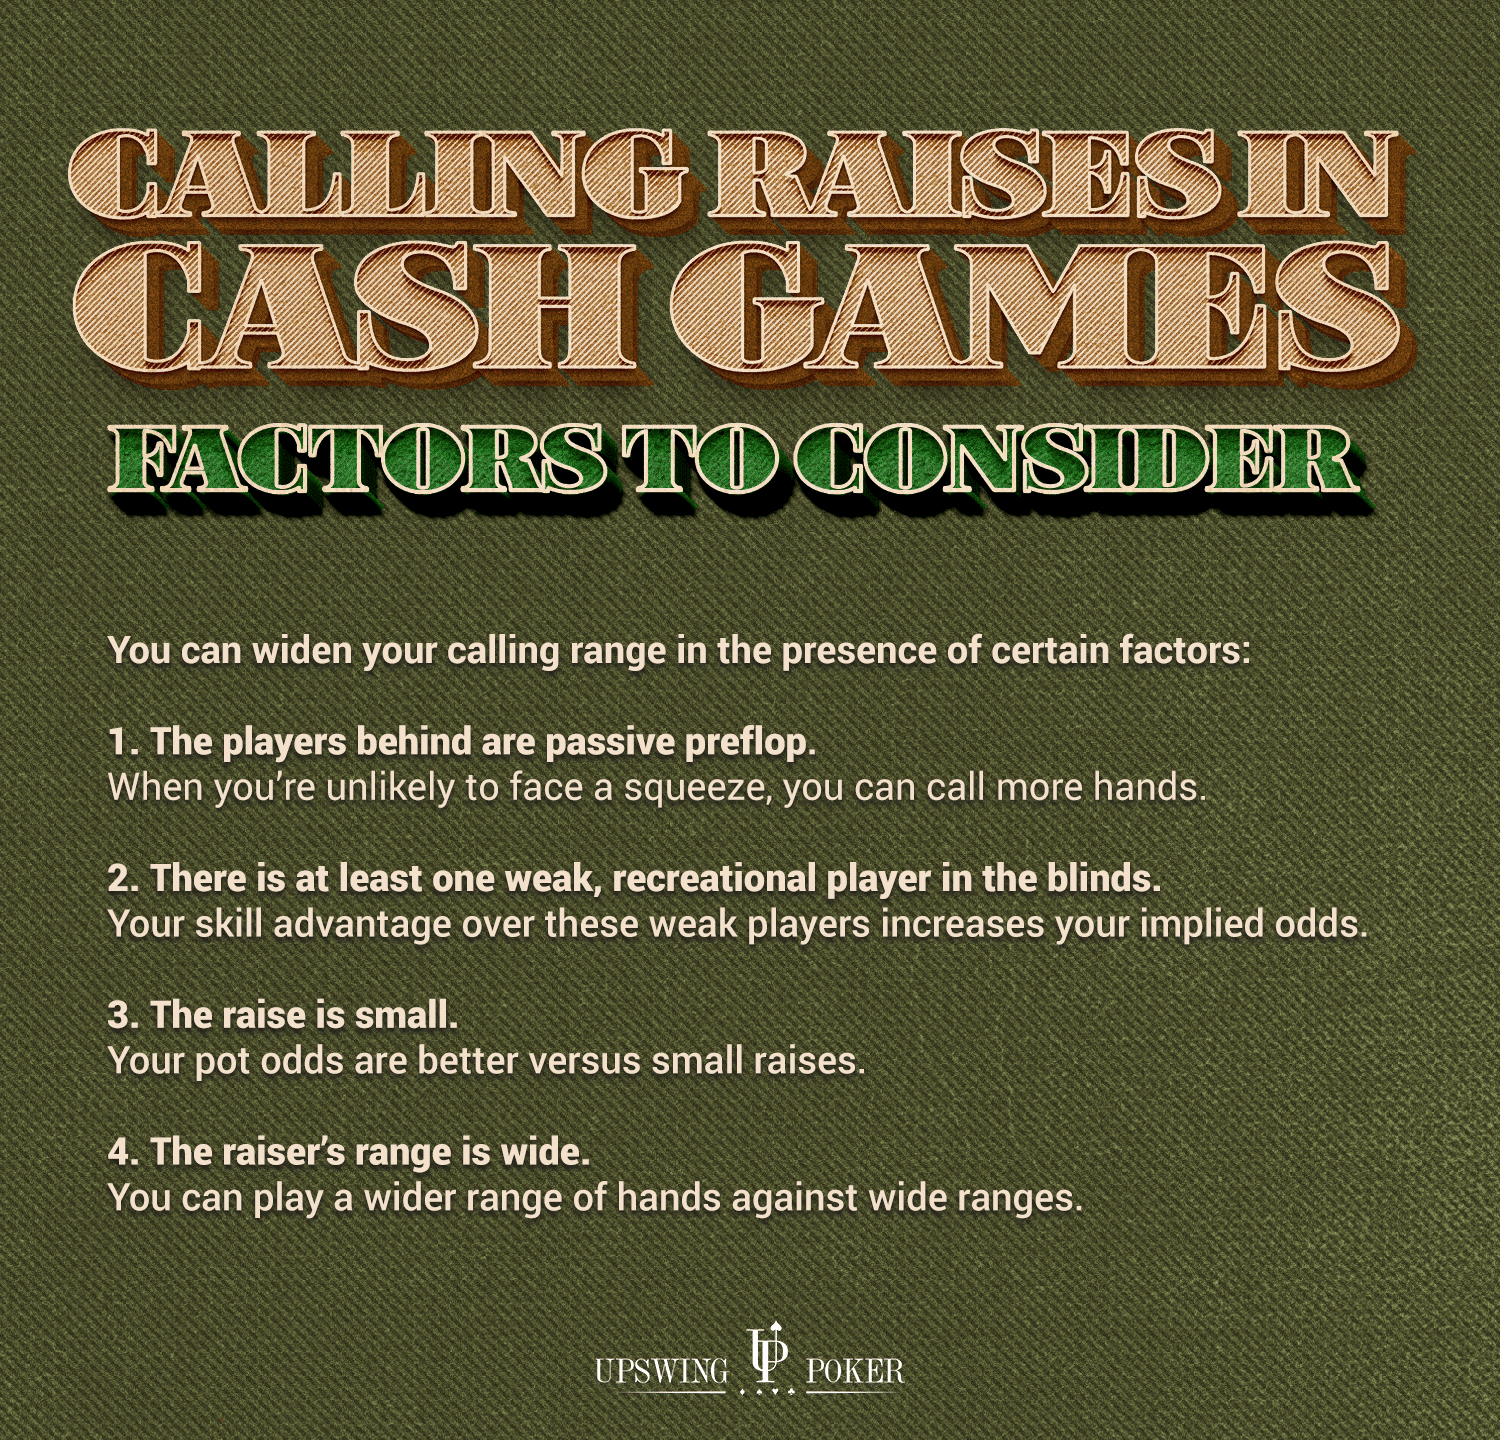 https://upswingpoker.com/wp-content/uploads/2020/03/CALLING-RAISES-IN-CASH-GAME-infographic.png